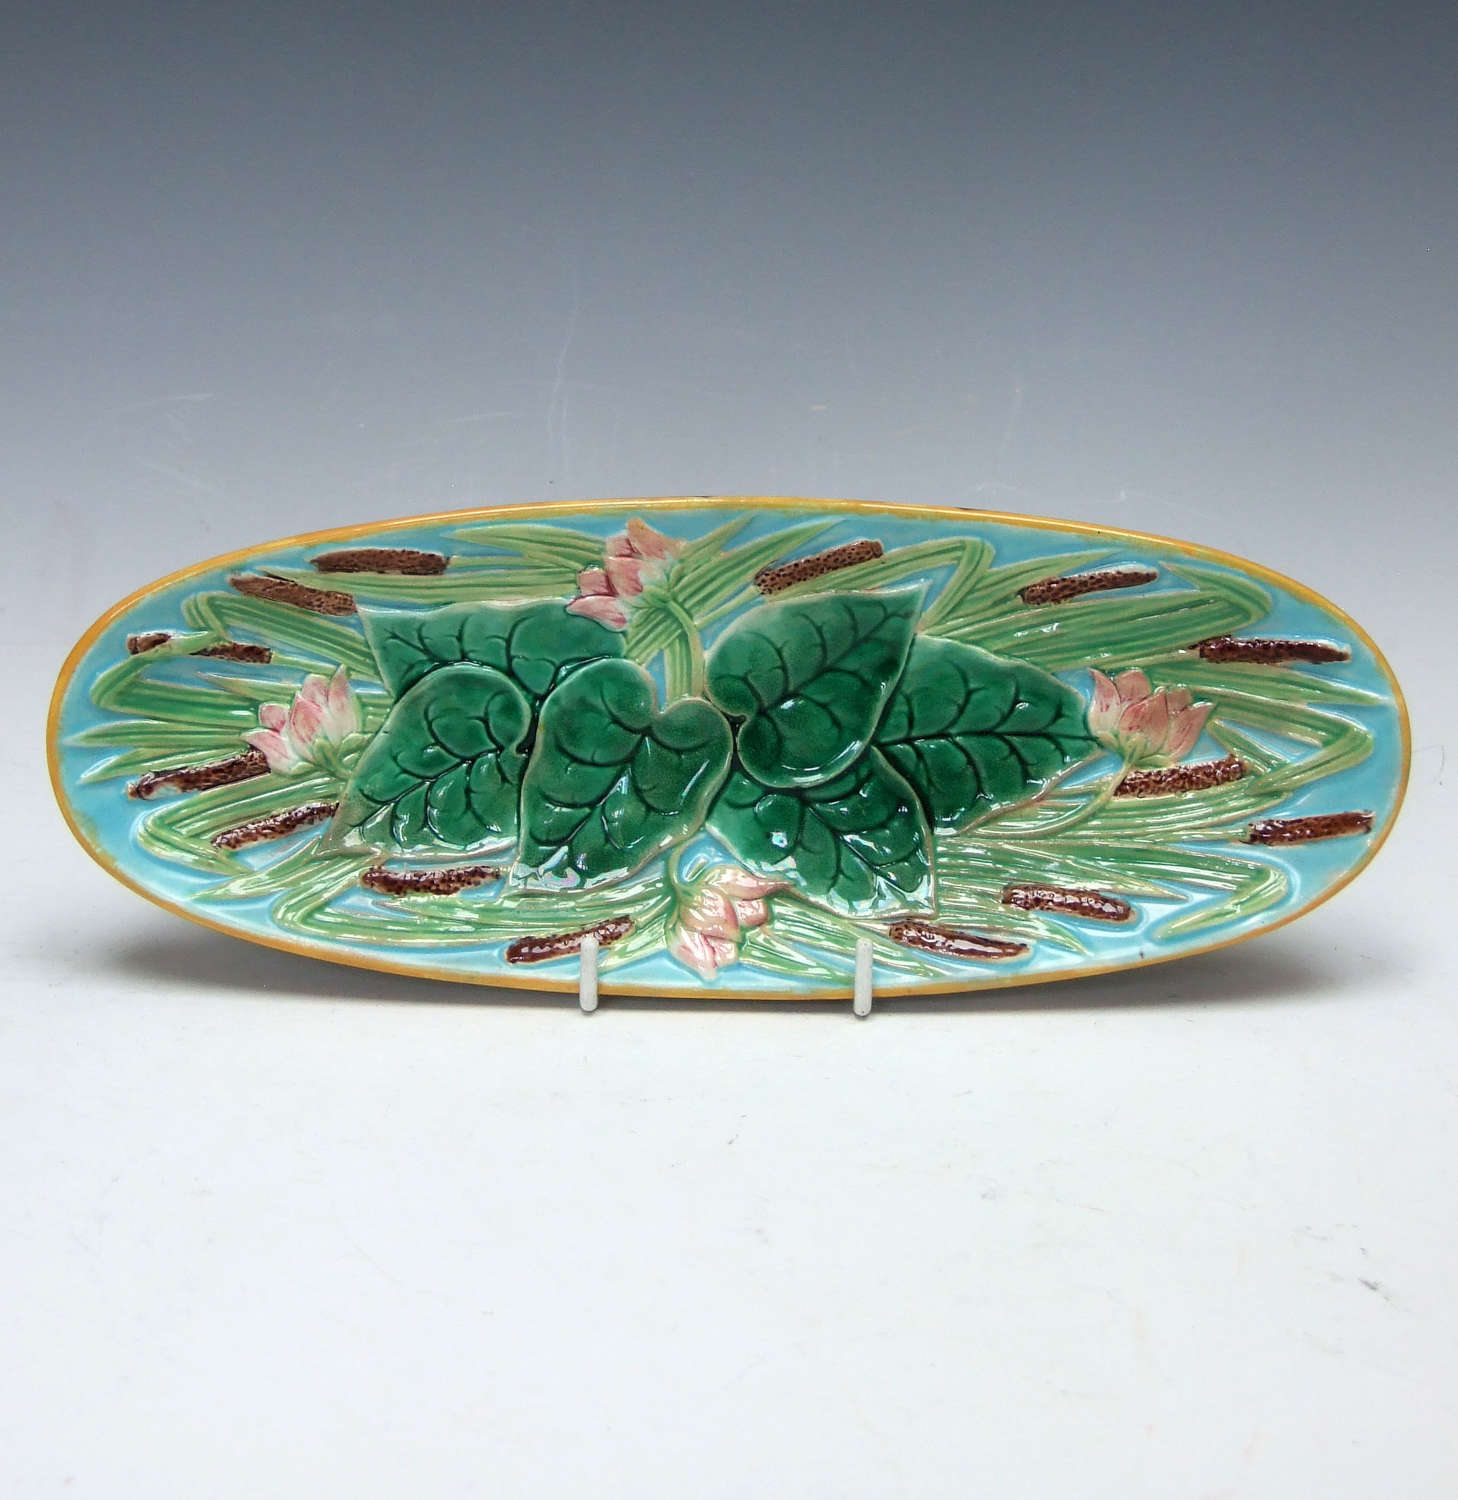 An extremely rare George Jones majolica lily & bulrush motif pin tray